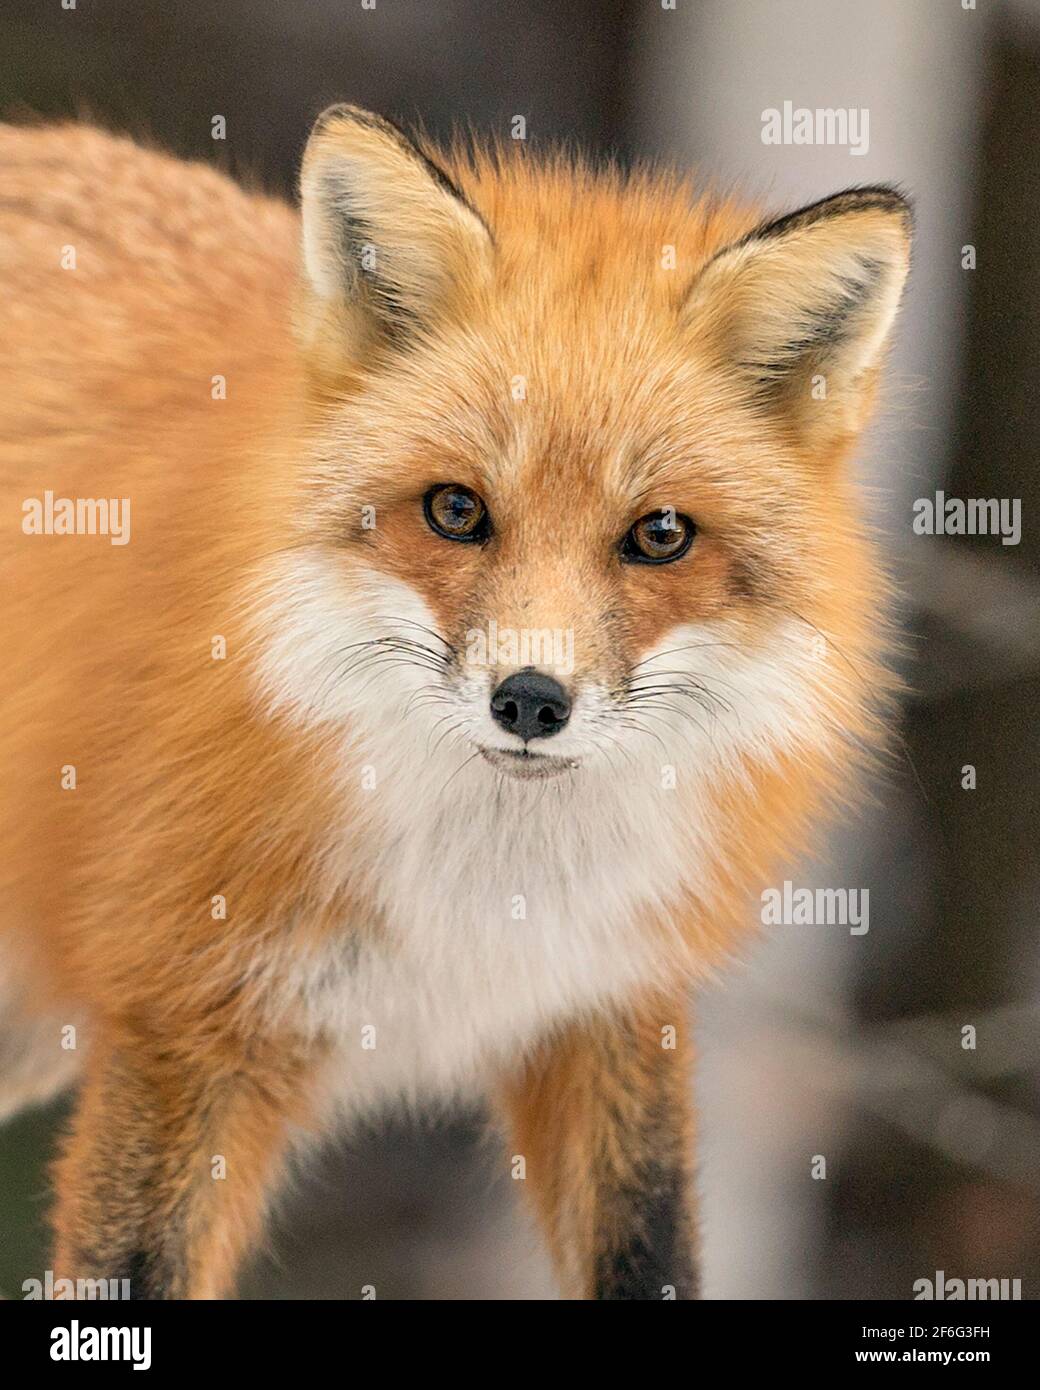 Red Fox head shot close-up profile view with a blur background in the forest looking at the camera displaying fur, in its environment. Fox Image. Stock Photo